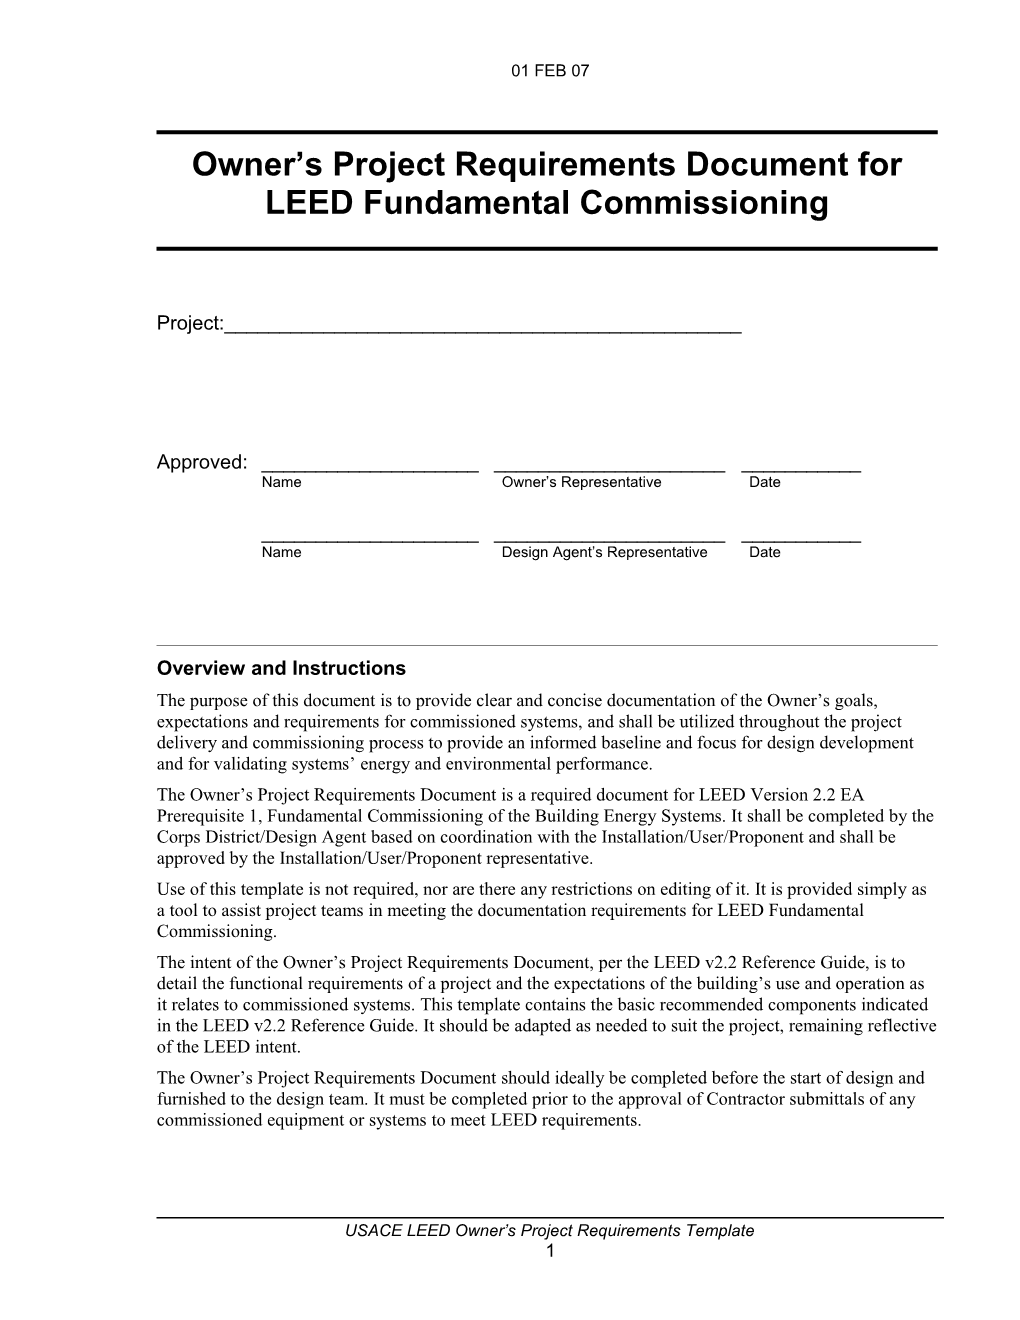 Owner S Project Requirements Document for LEED Fundamental Commissioning